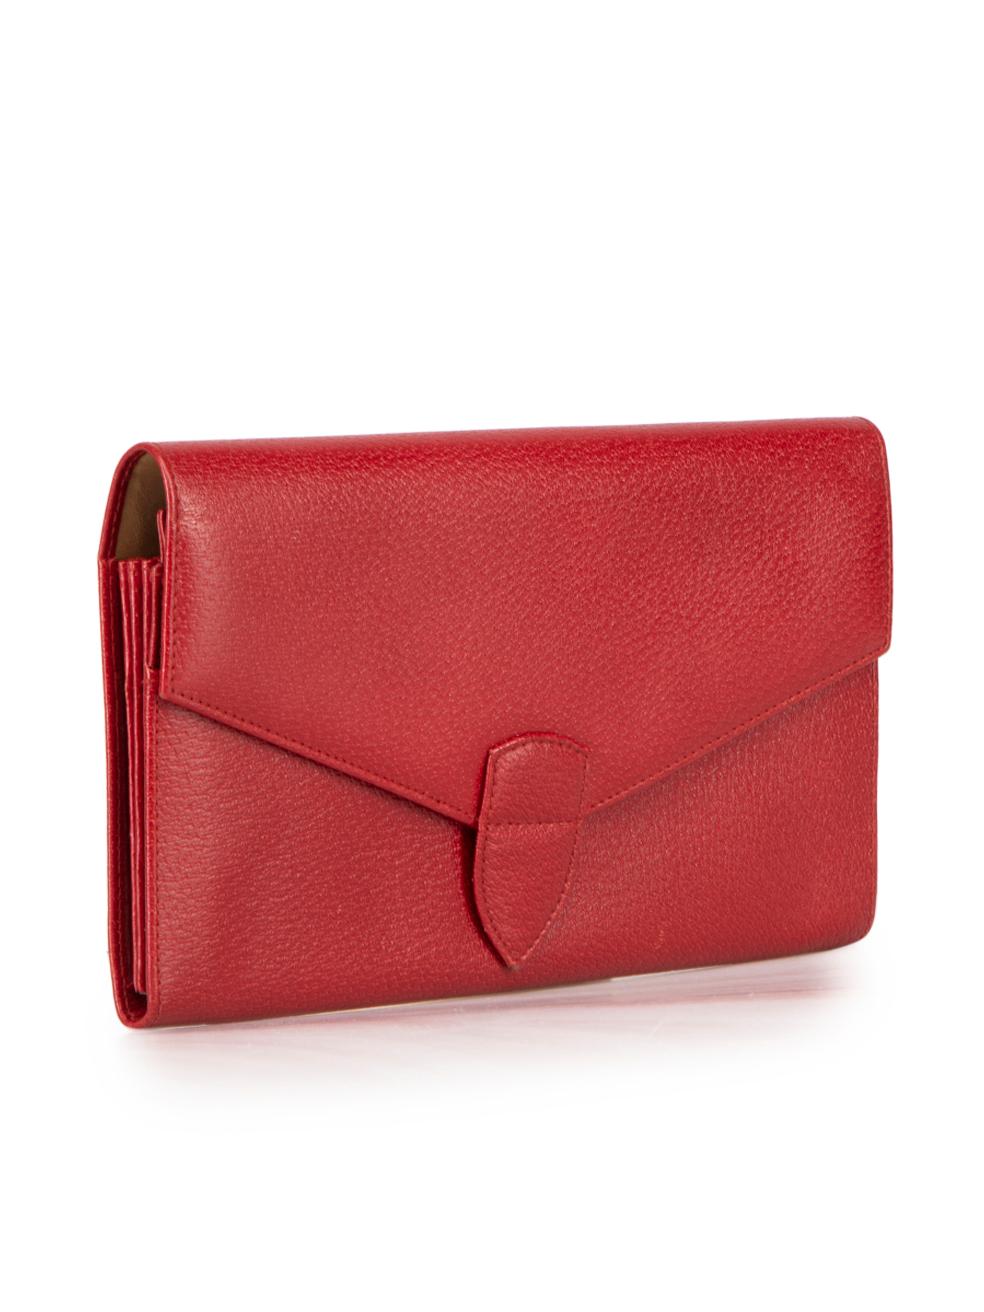 CONDITION is Very good. Minimal wear to wallet is evident. Minimal scratches to leather on front, minimal abrasion to the tip of strap closure. Minor sticker stains on the interior of wallet on this used Smythson designer resale item.
